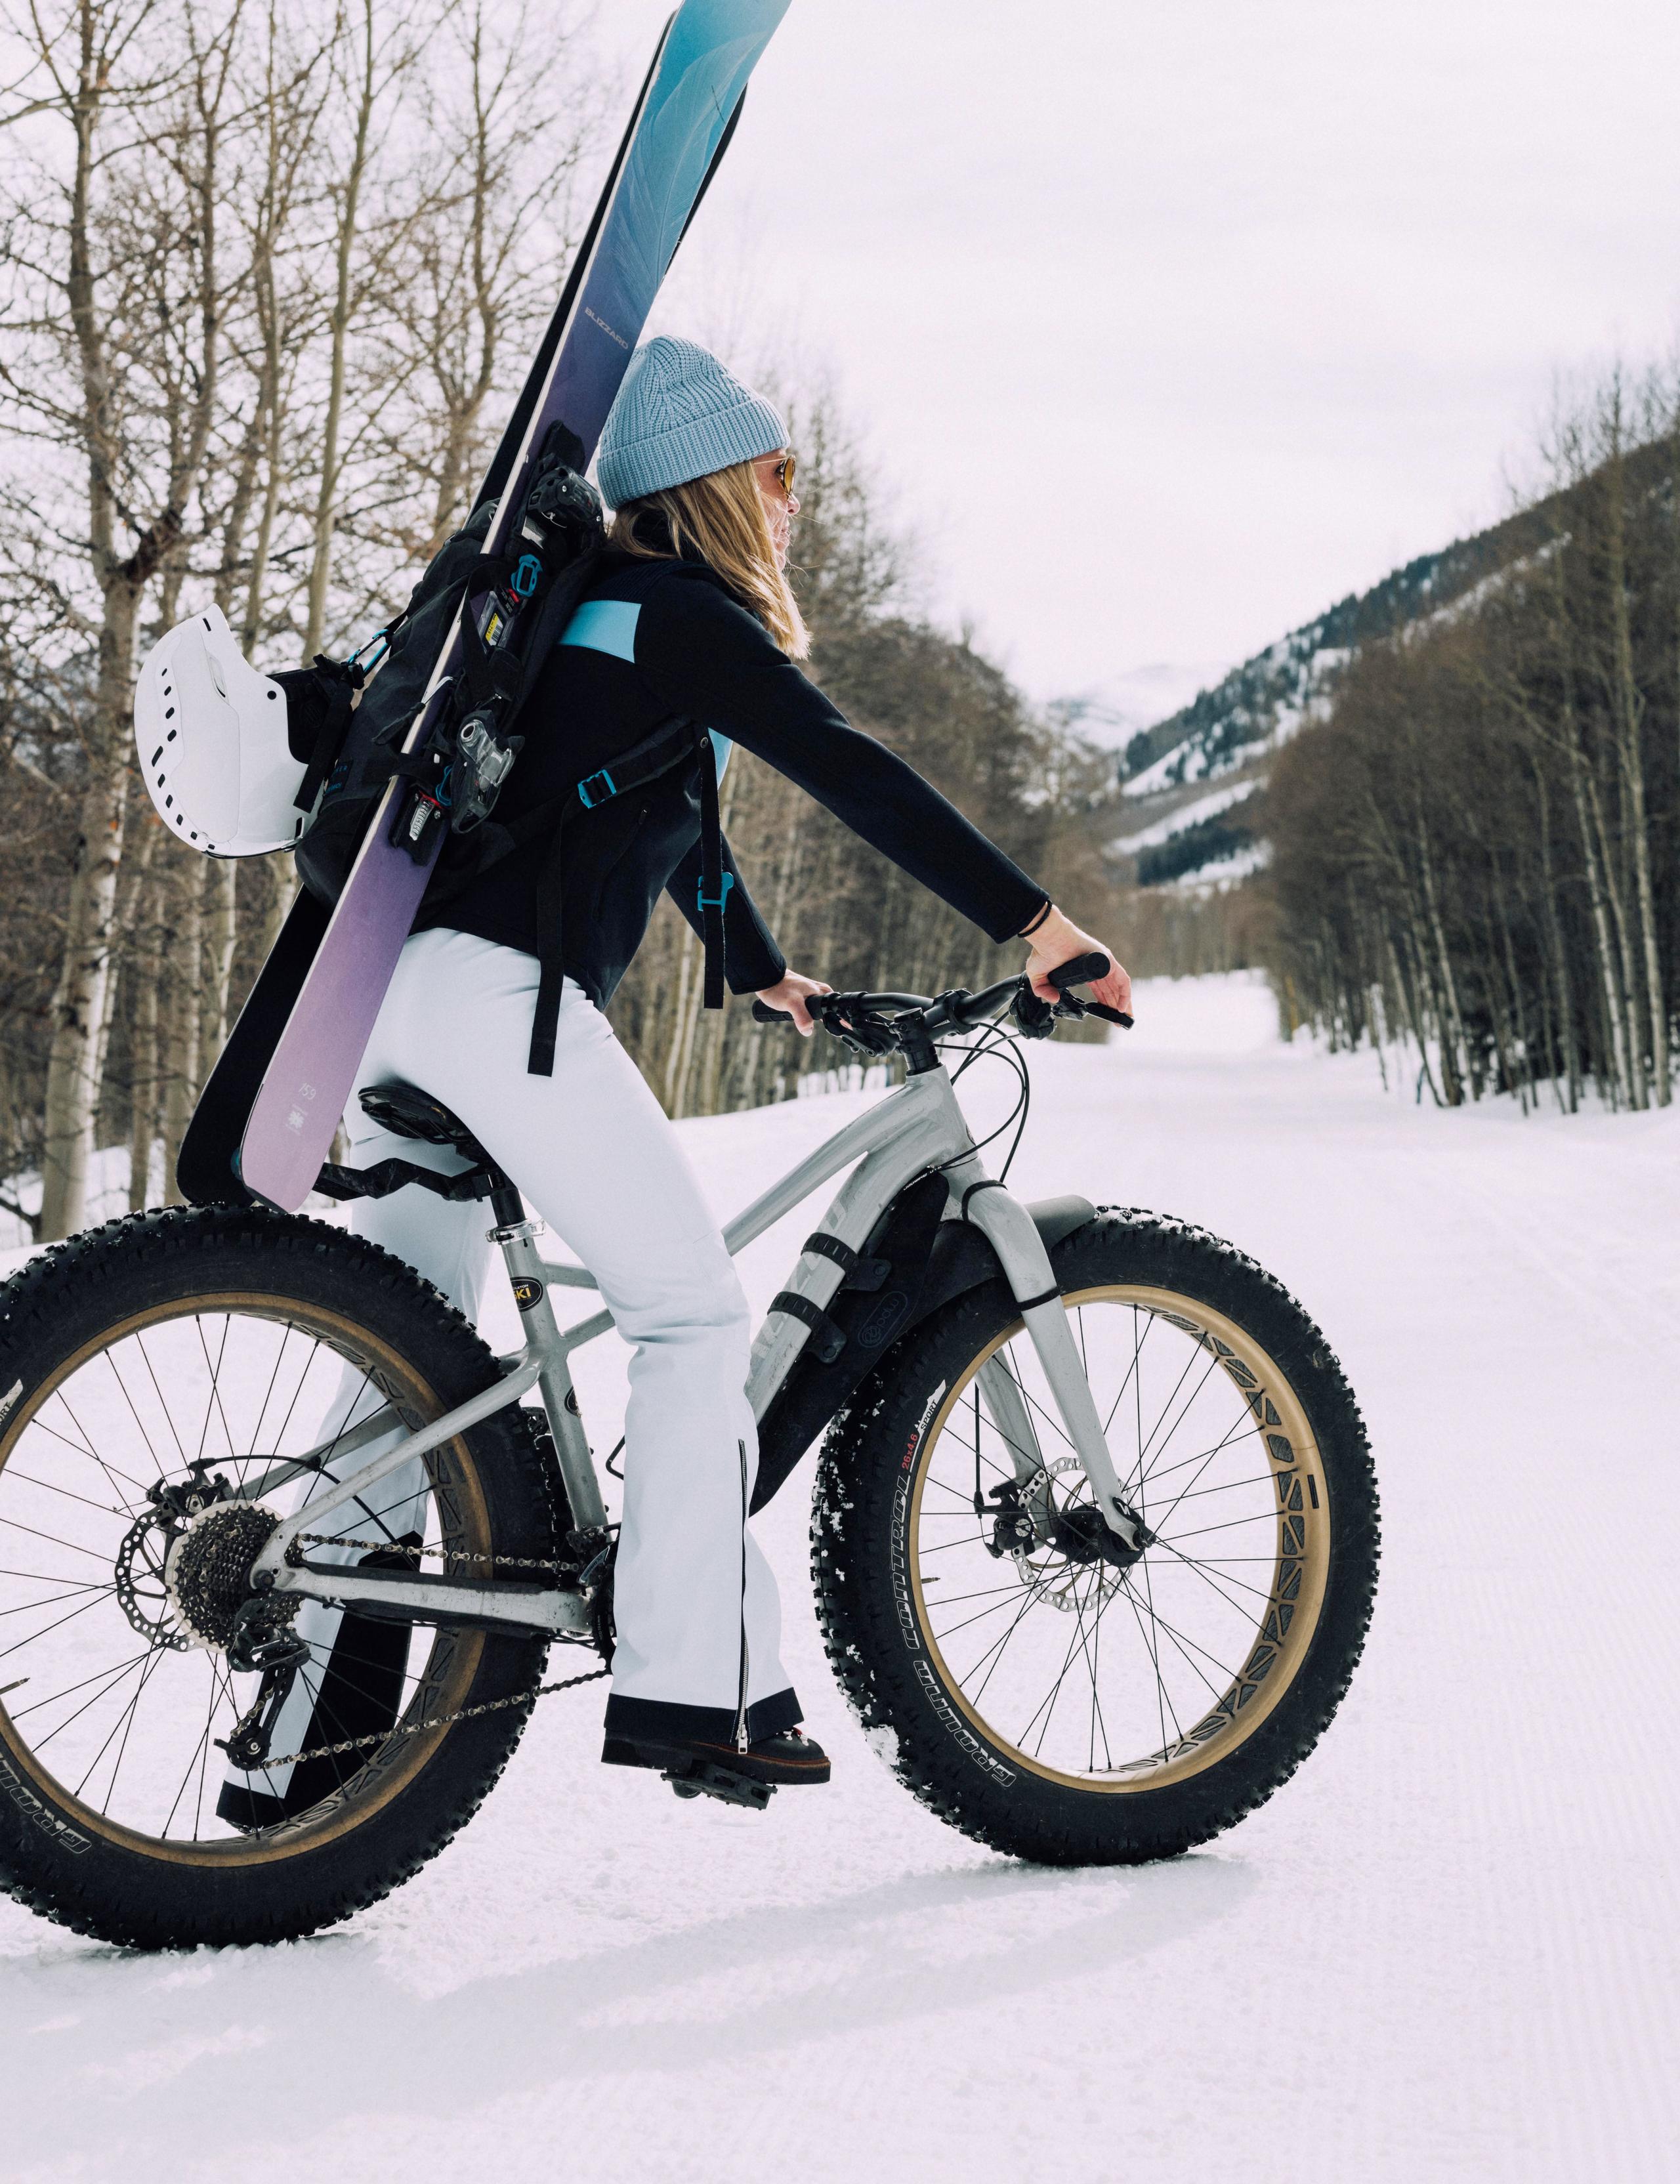 Women in ski outfit on a fat tire bicycle